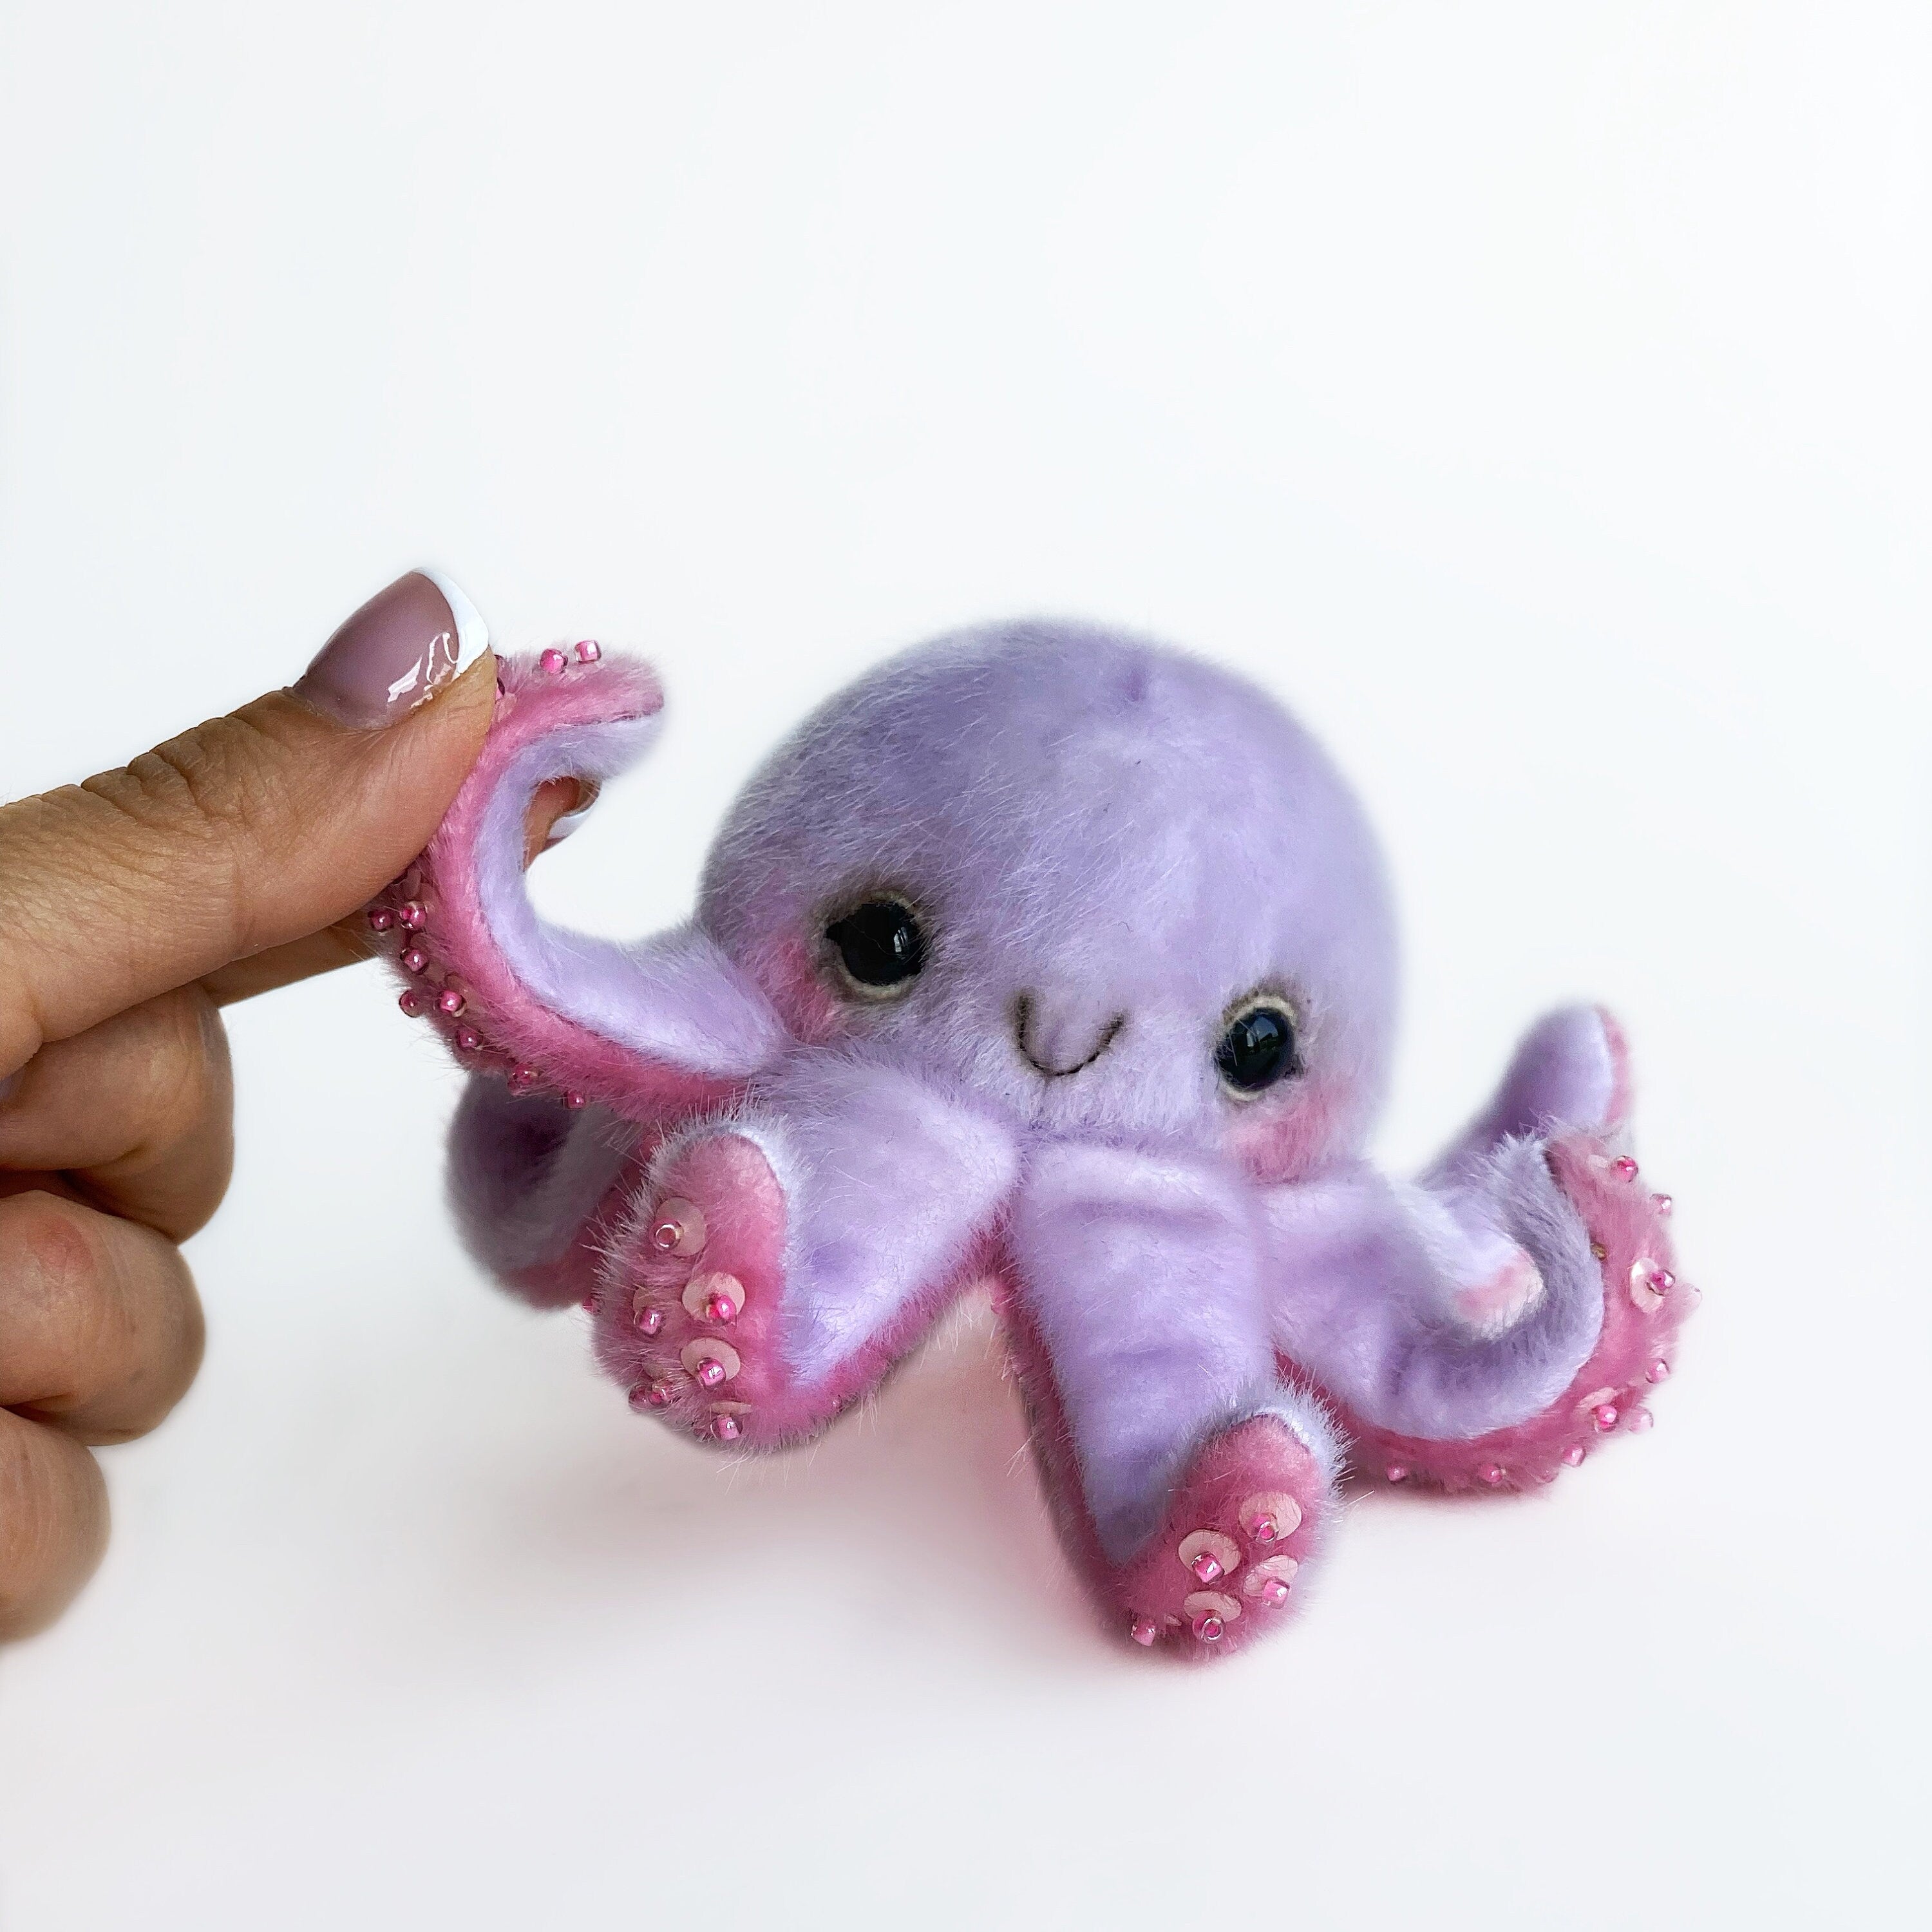 Octopus PDF sewing pattern Video tutorial DIY stuffed toy pattern kids toy pattern easy to sew gift for creative friend Bestseller